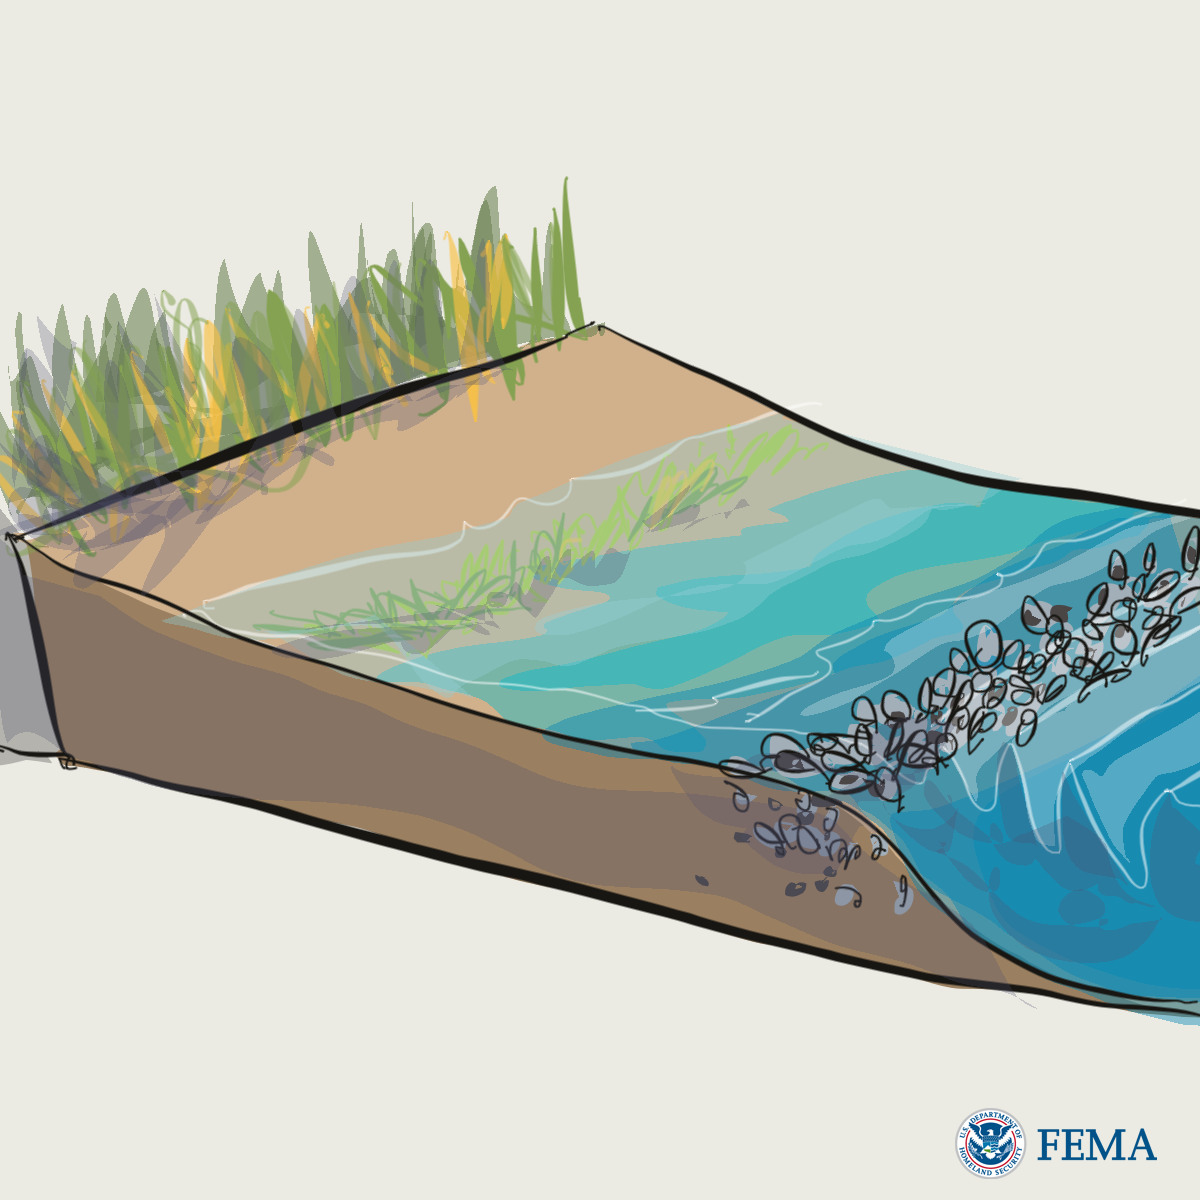 Graphic for Coastal Areas: Oyster Reefs